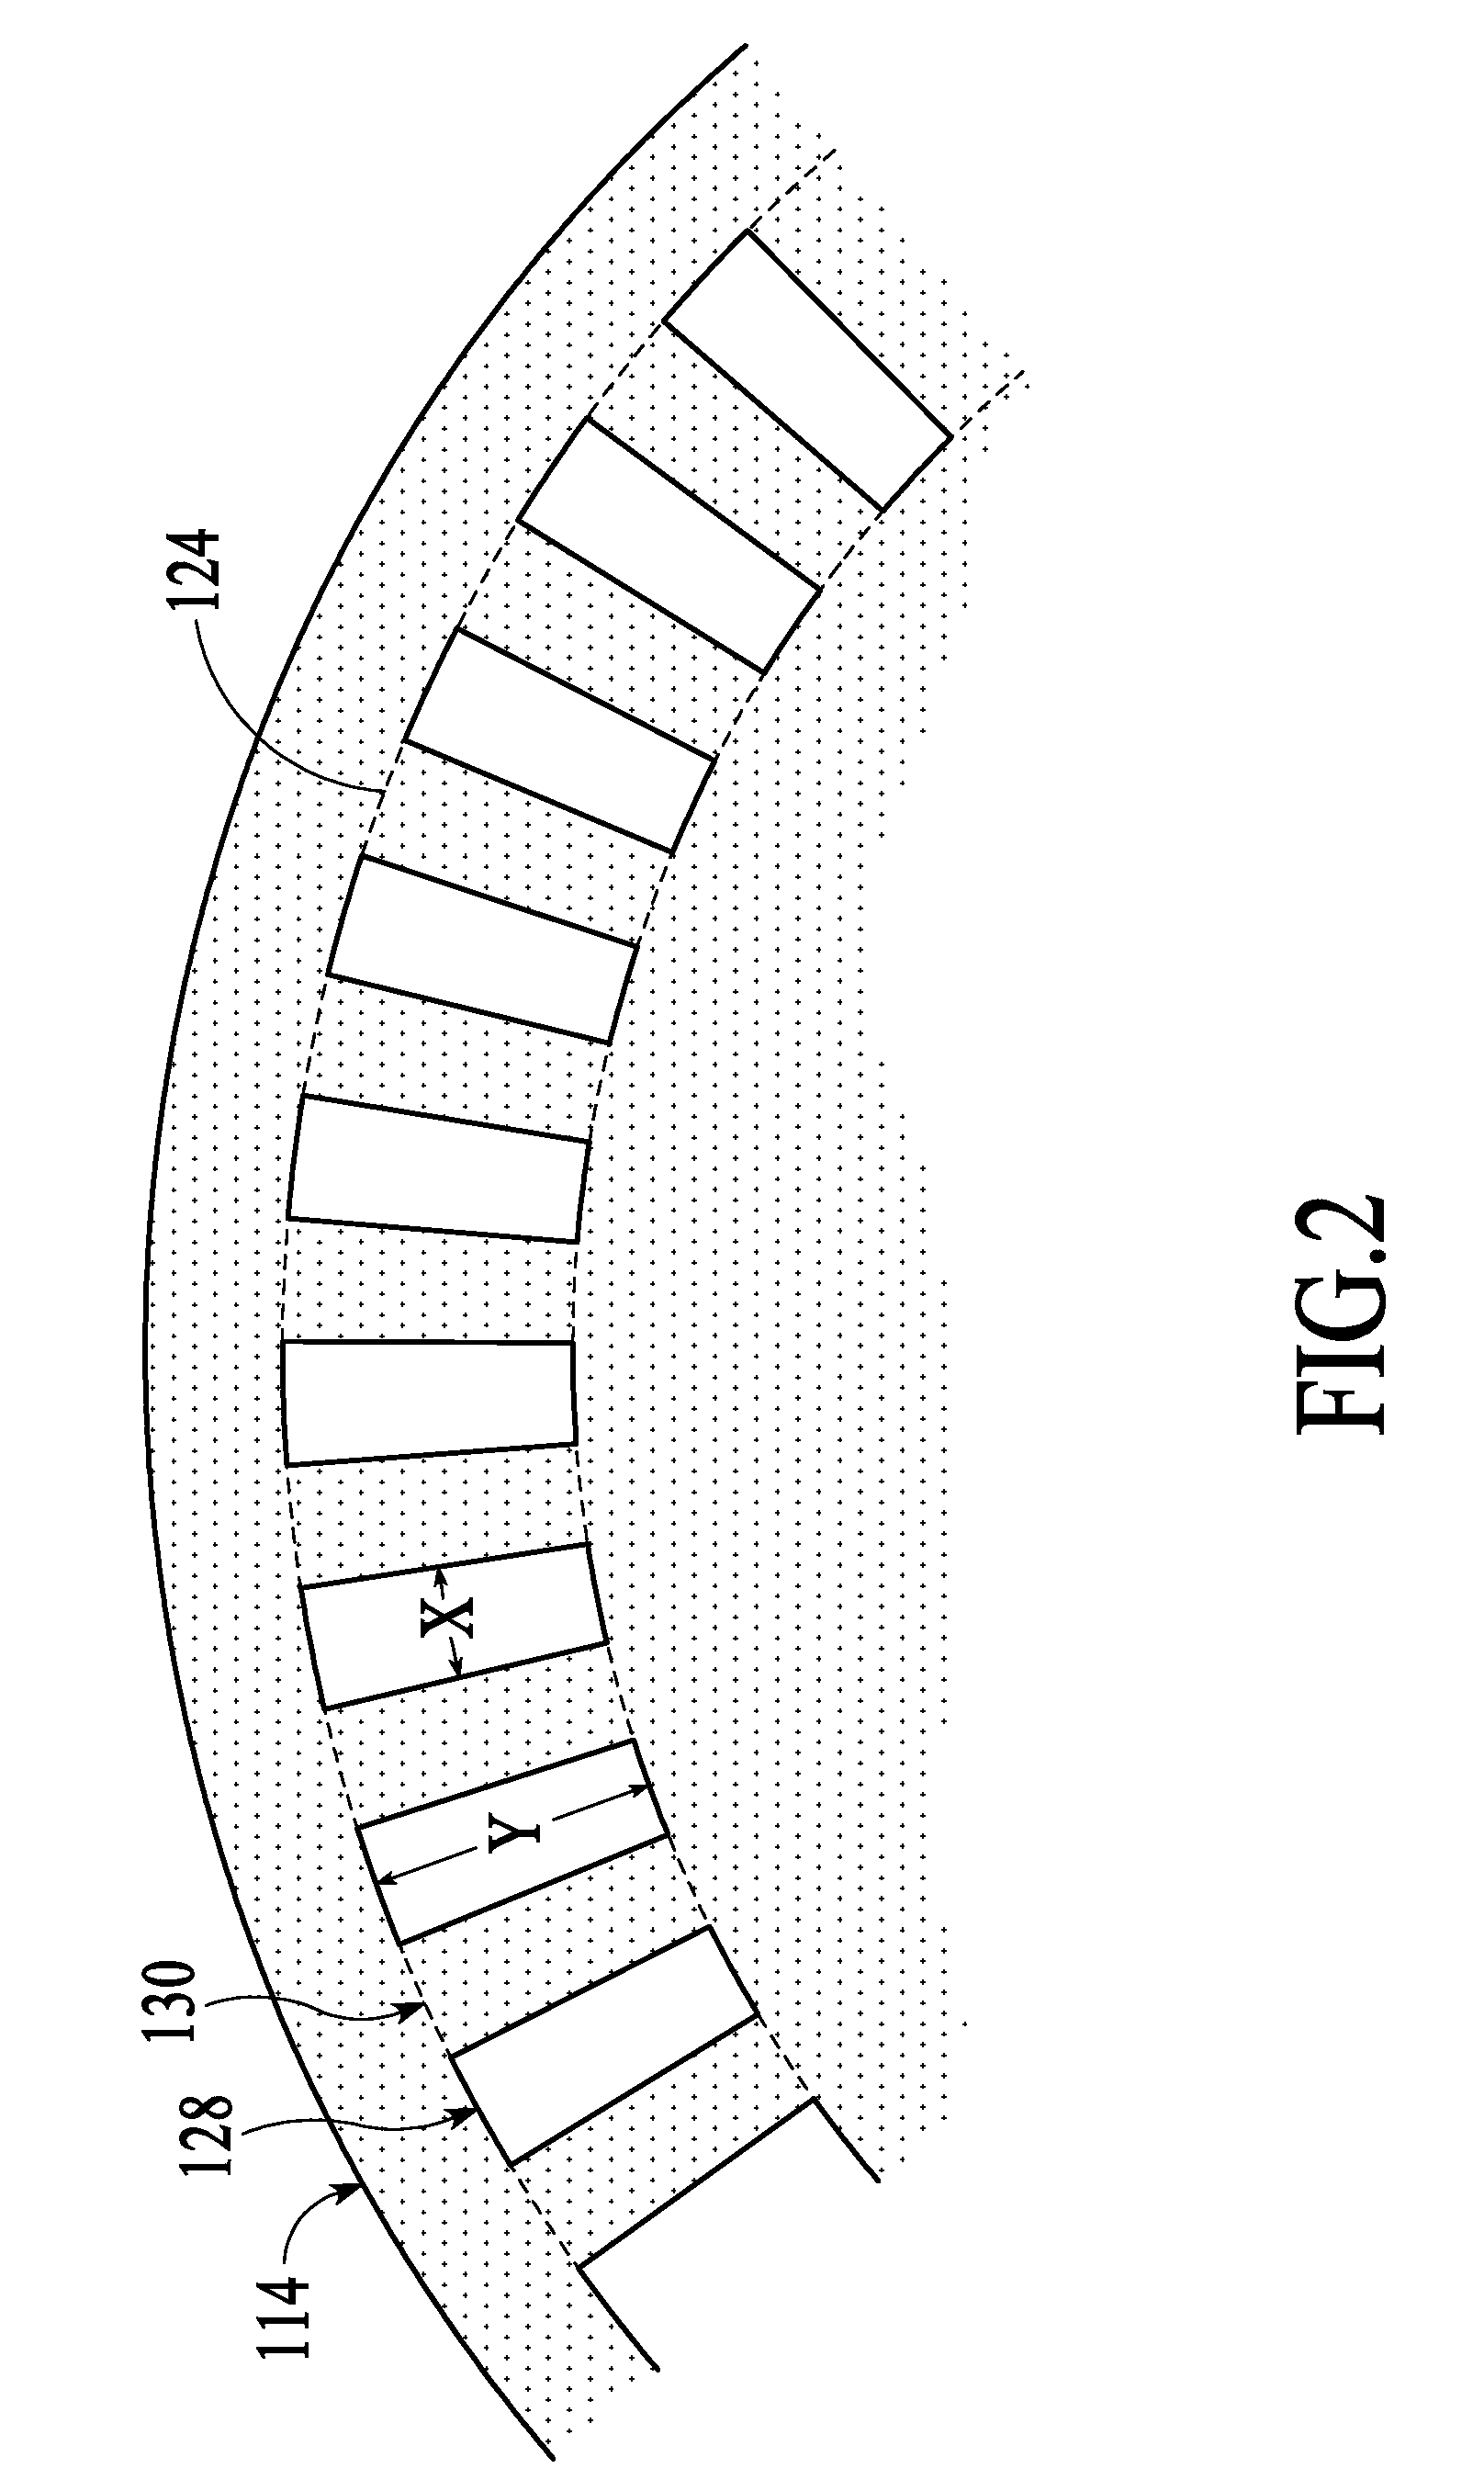 Photodetector array and codewheel configuration for flexible optical encoder resolution